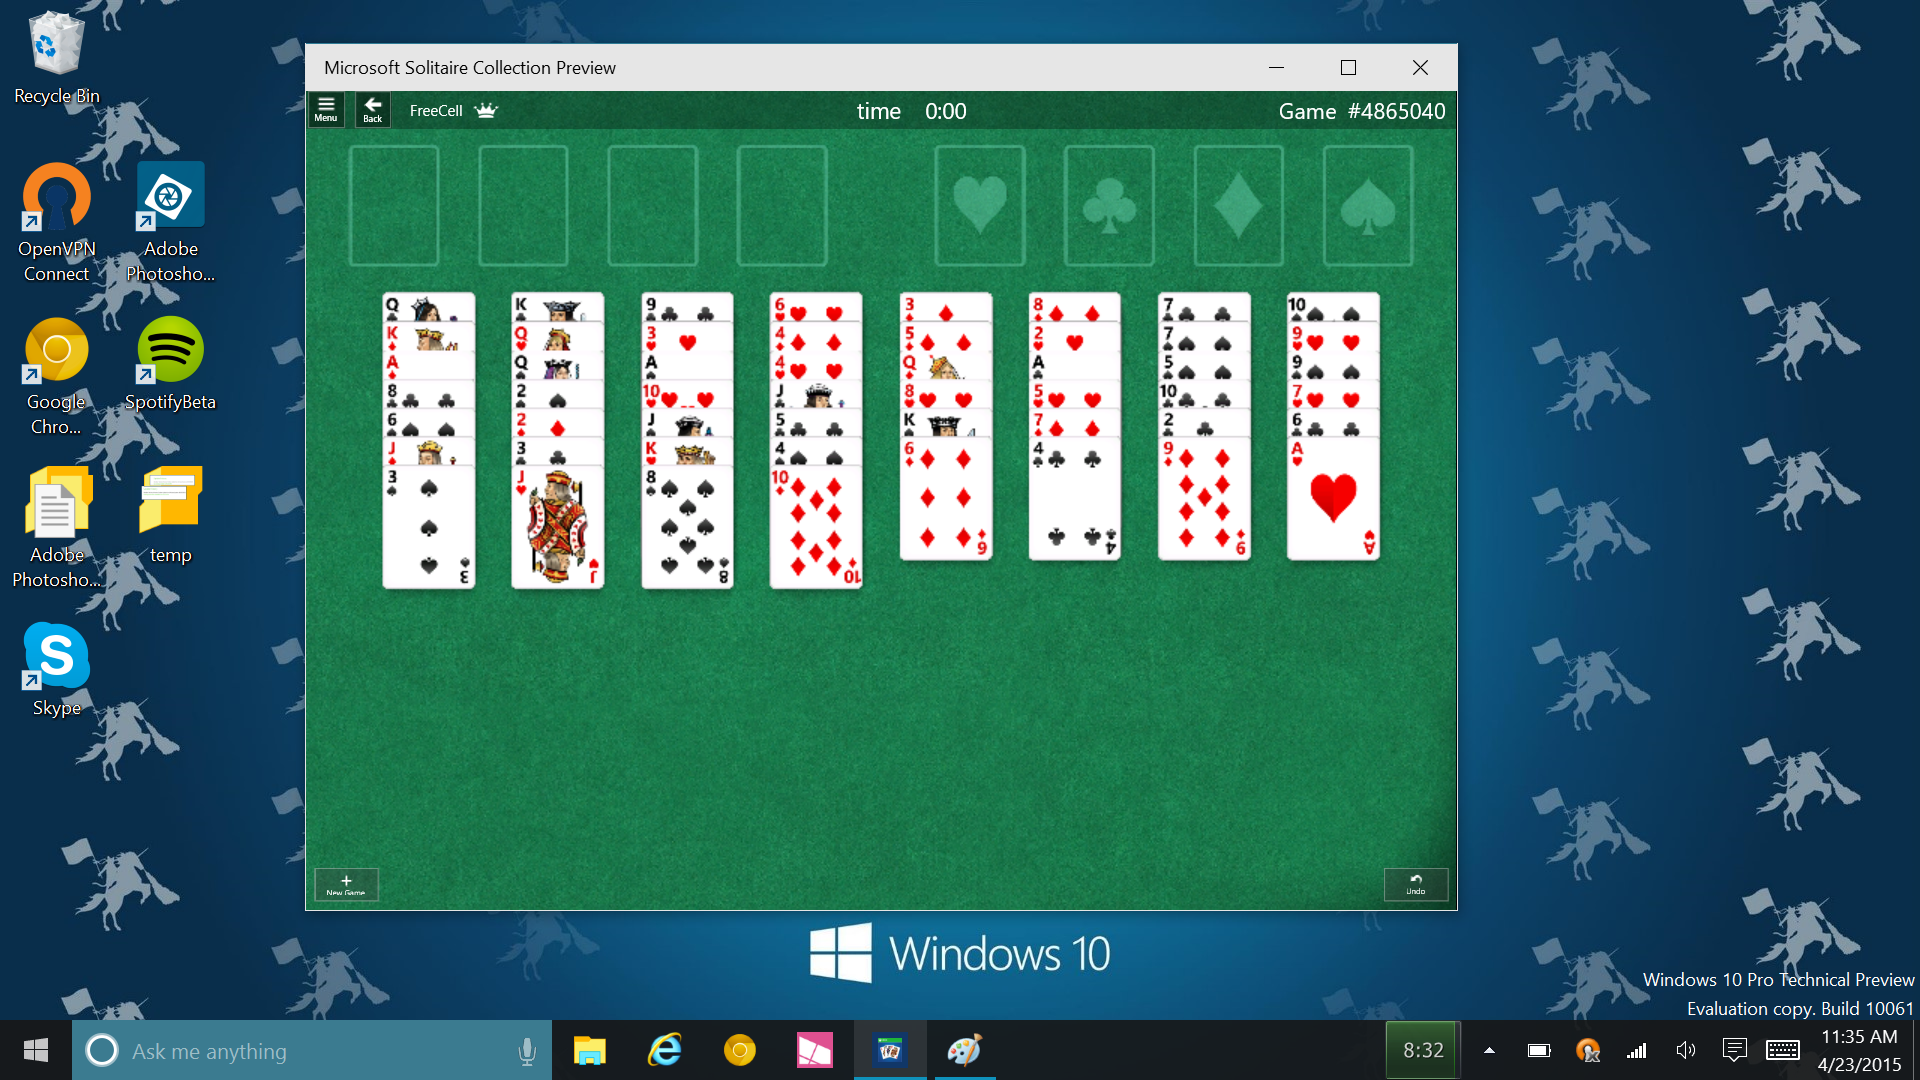 Solitaire Is Back on Windows 10, but Microsoft Wants You to Pay to